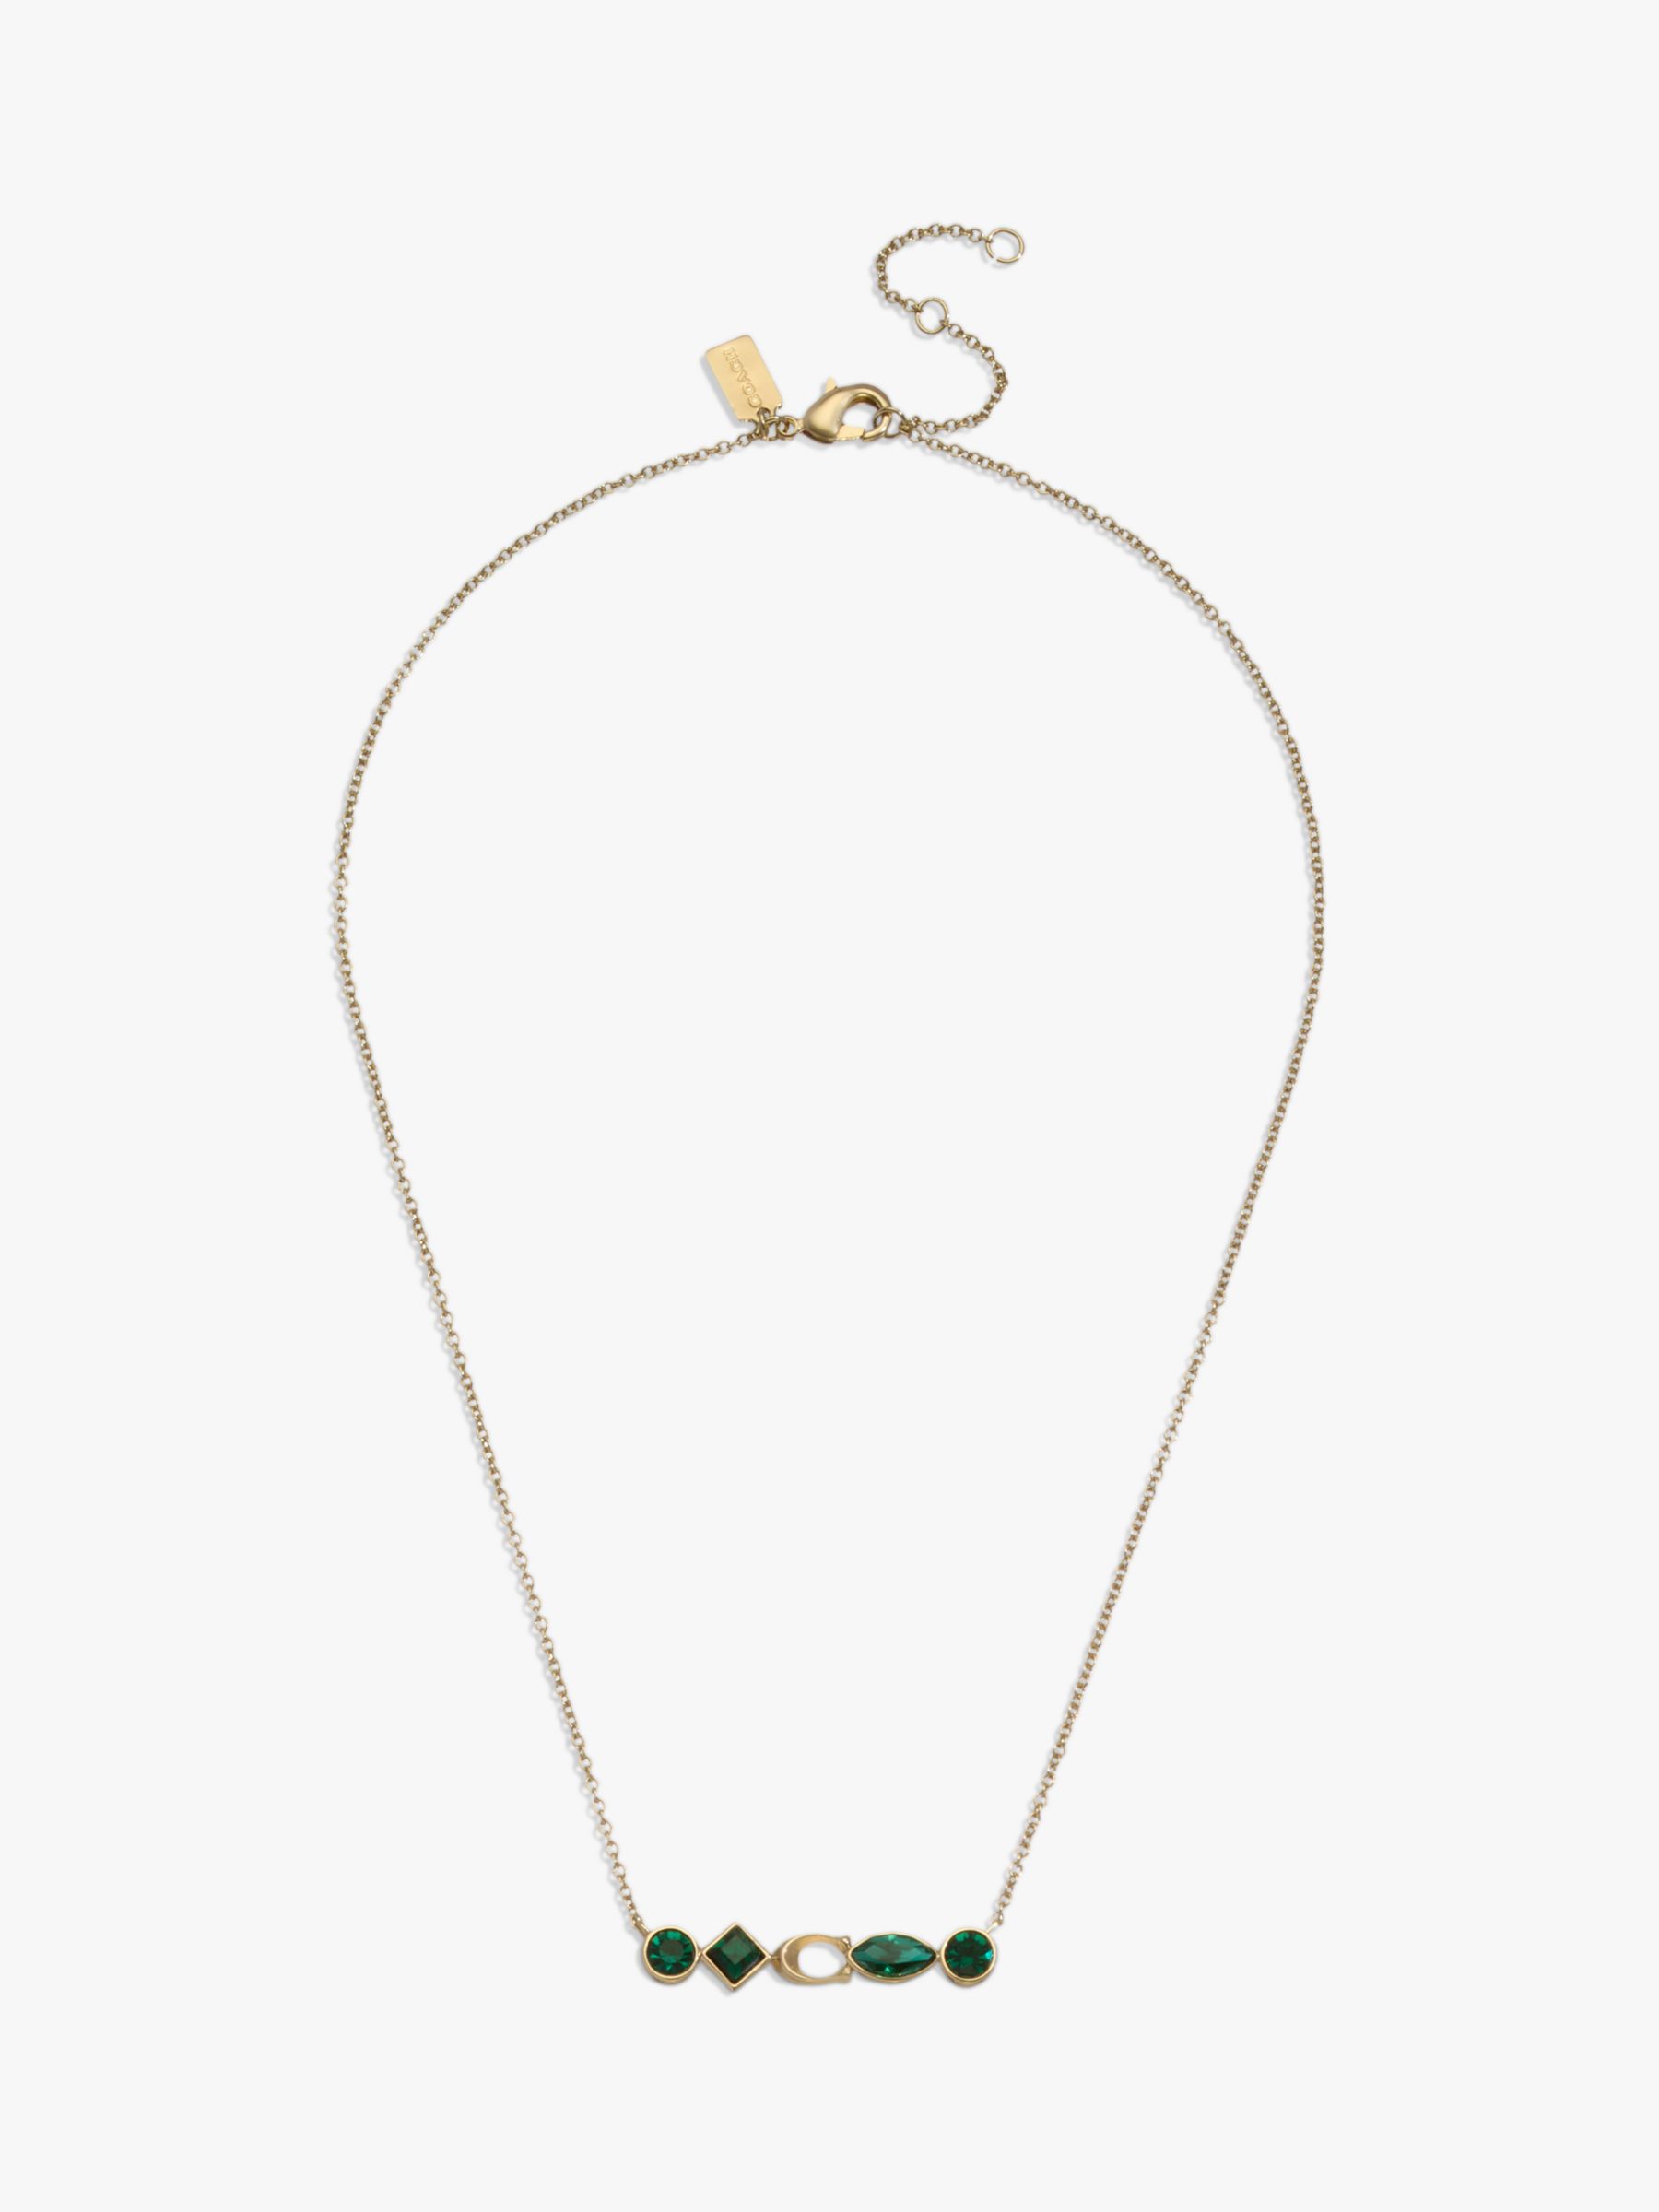 Buy Coach Sculpted C & Crystal Necklace and Drop Earrings Jewellery Set, Gold/Dark Green Online at johnlewis.com